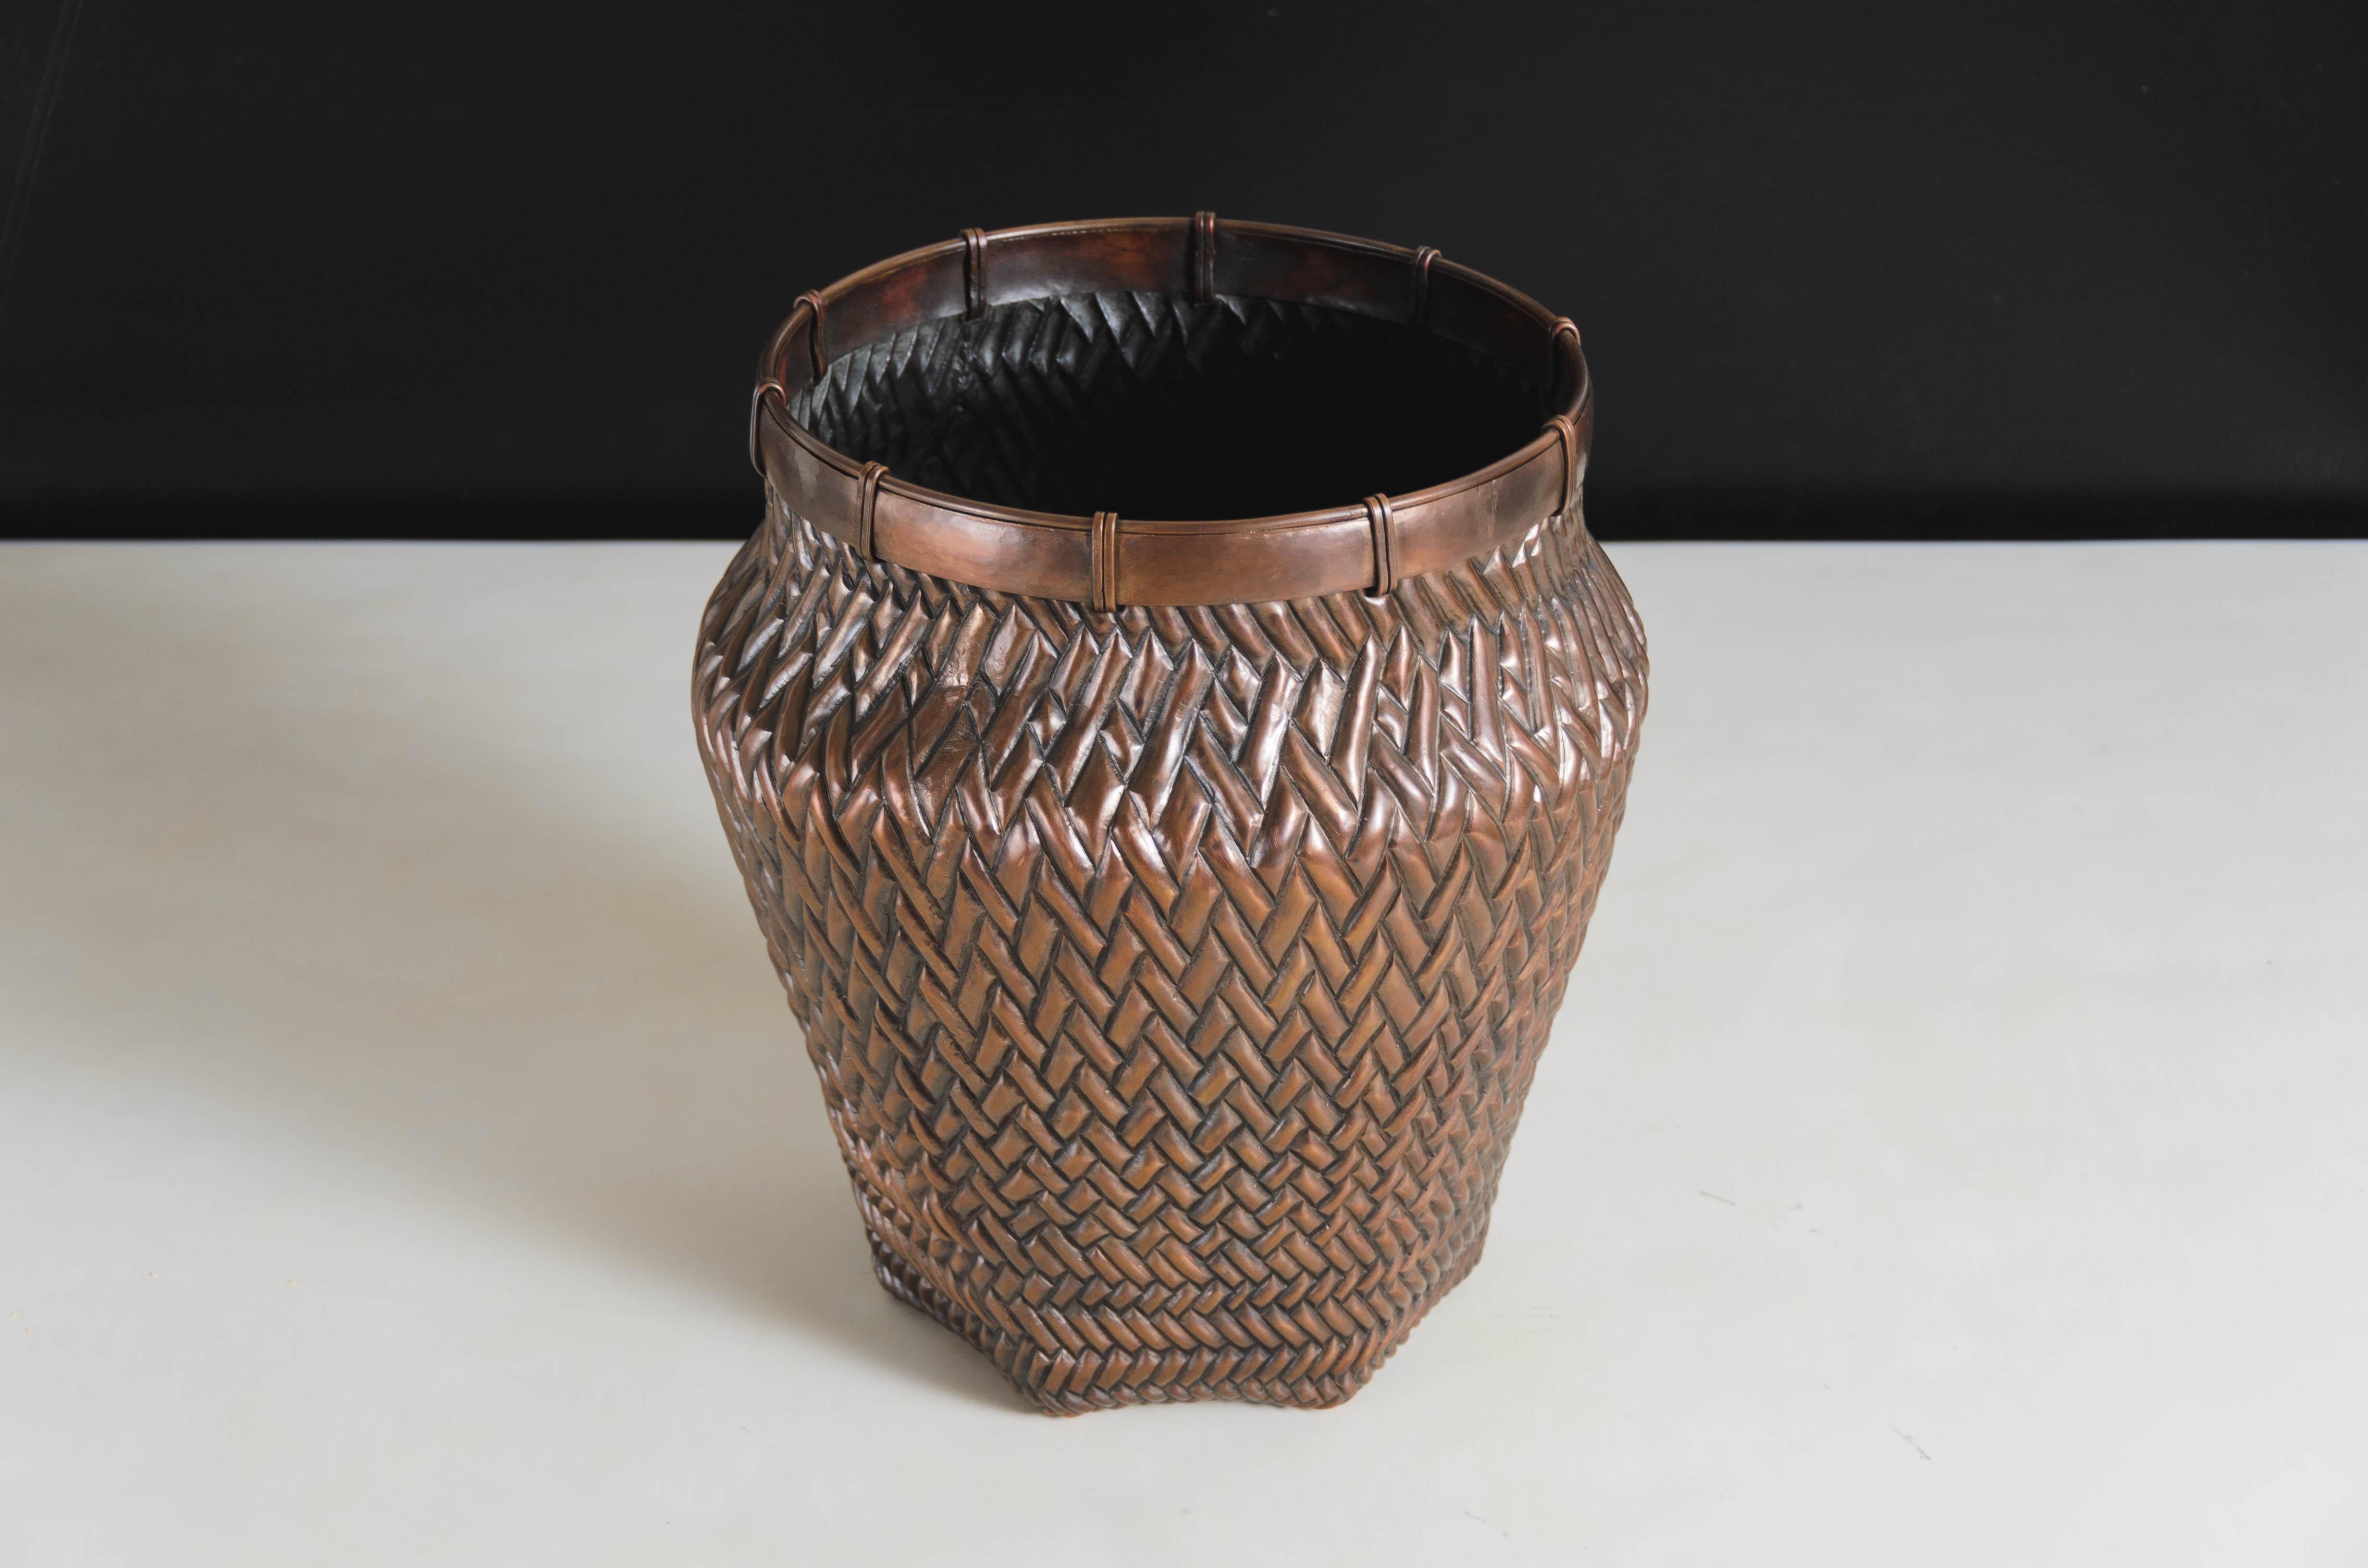 Weave design vase
Antique copper
Hand Repoussé
Limited edition
Each piece is individually crafted and is unique. 
Use liner for floral arrangement
Repoussé is the traditional art of hand-hammering decorative relief onto sheet metal. The